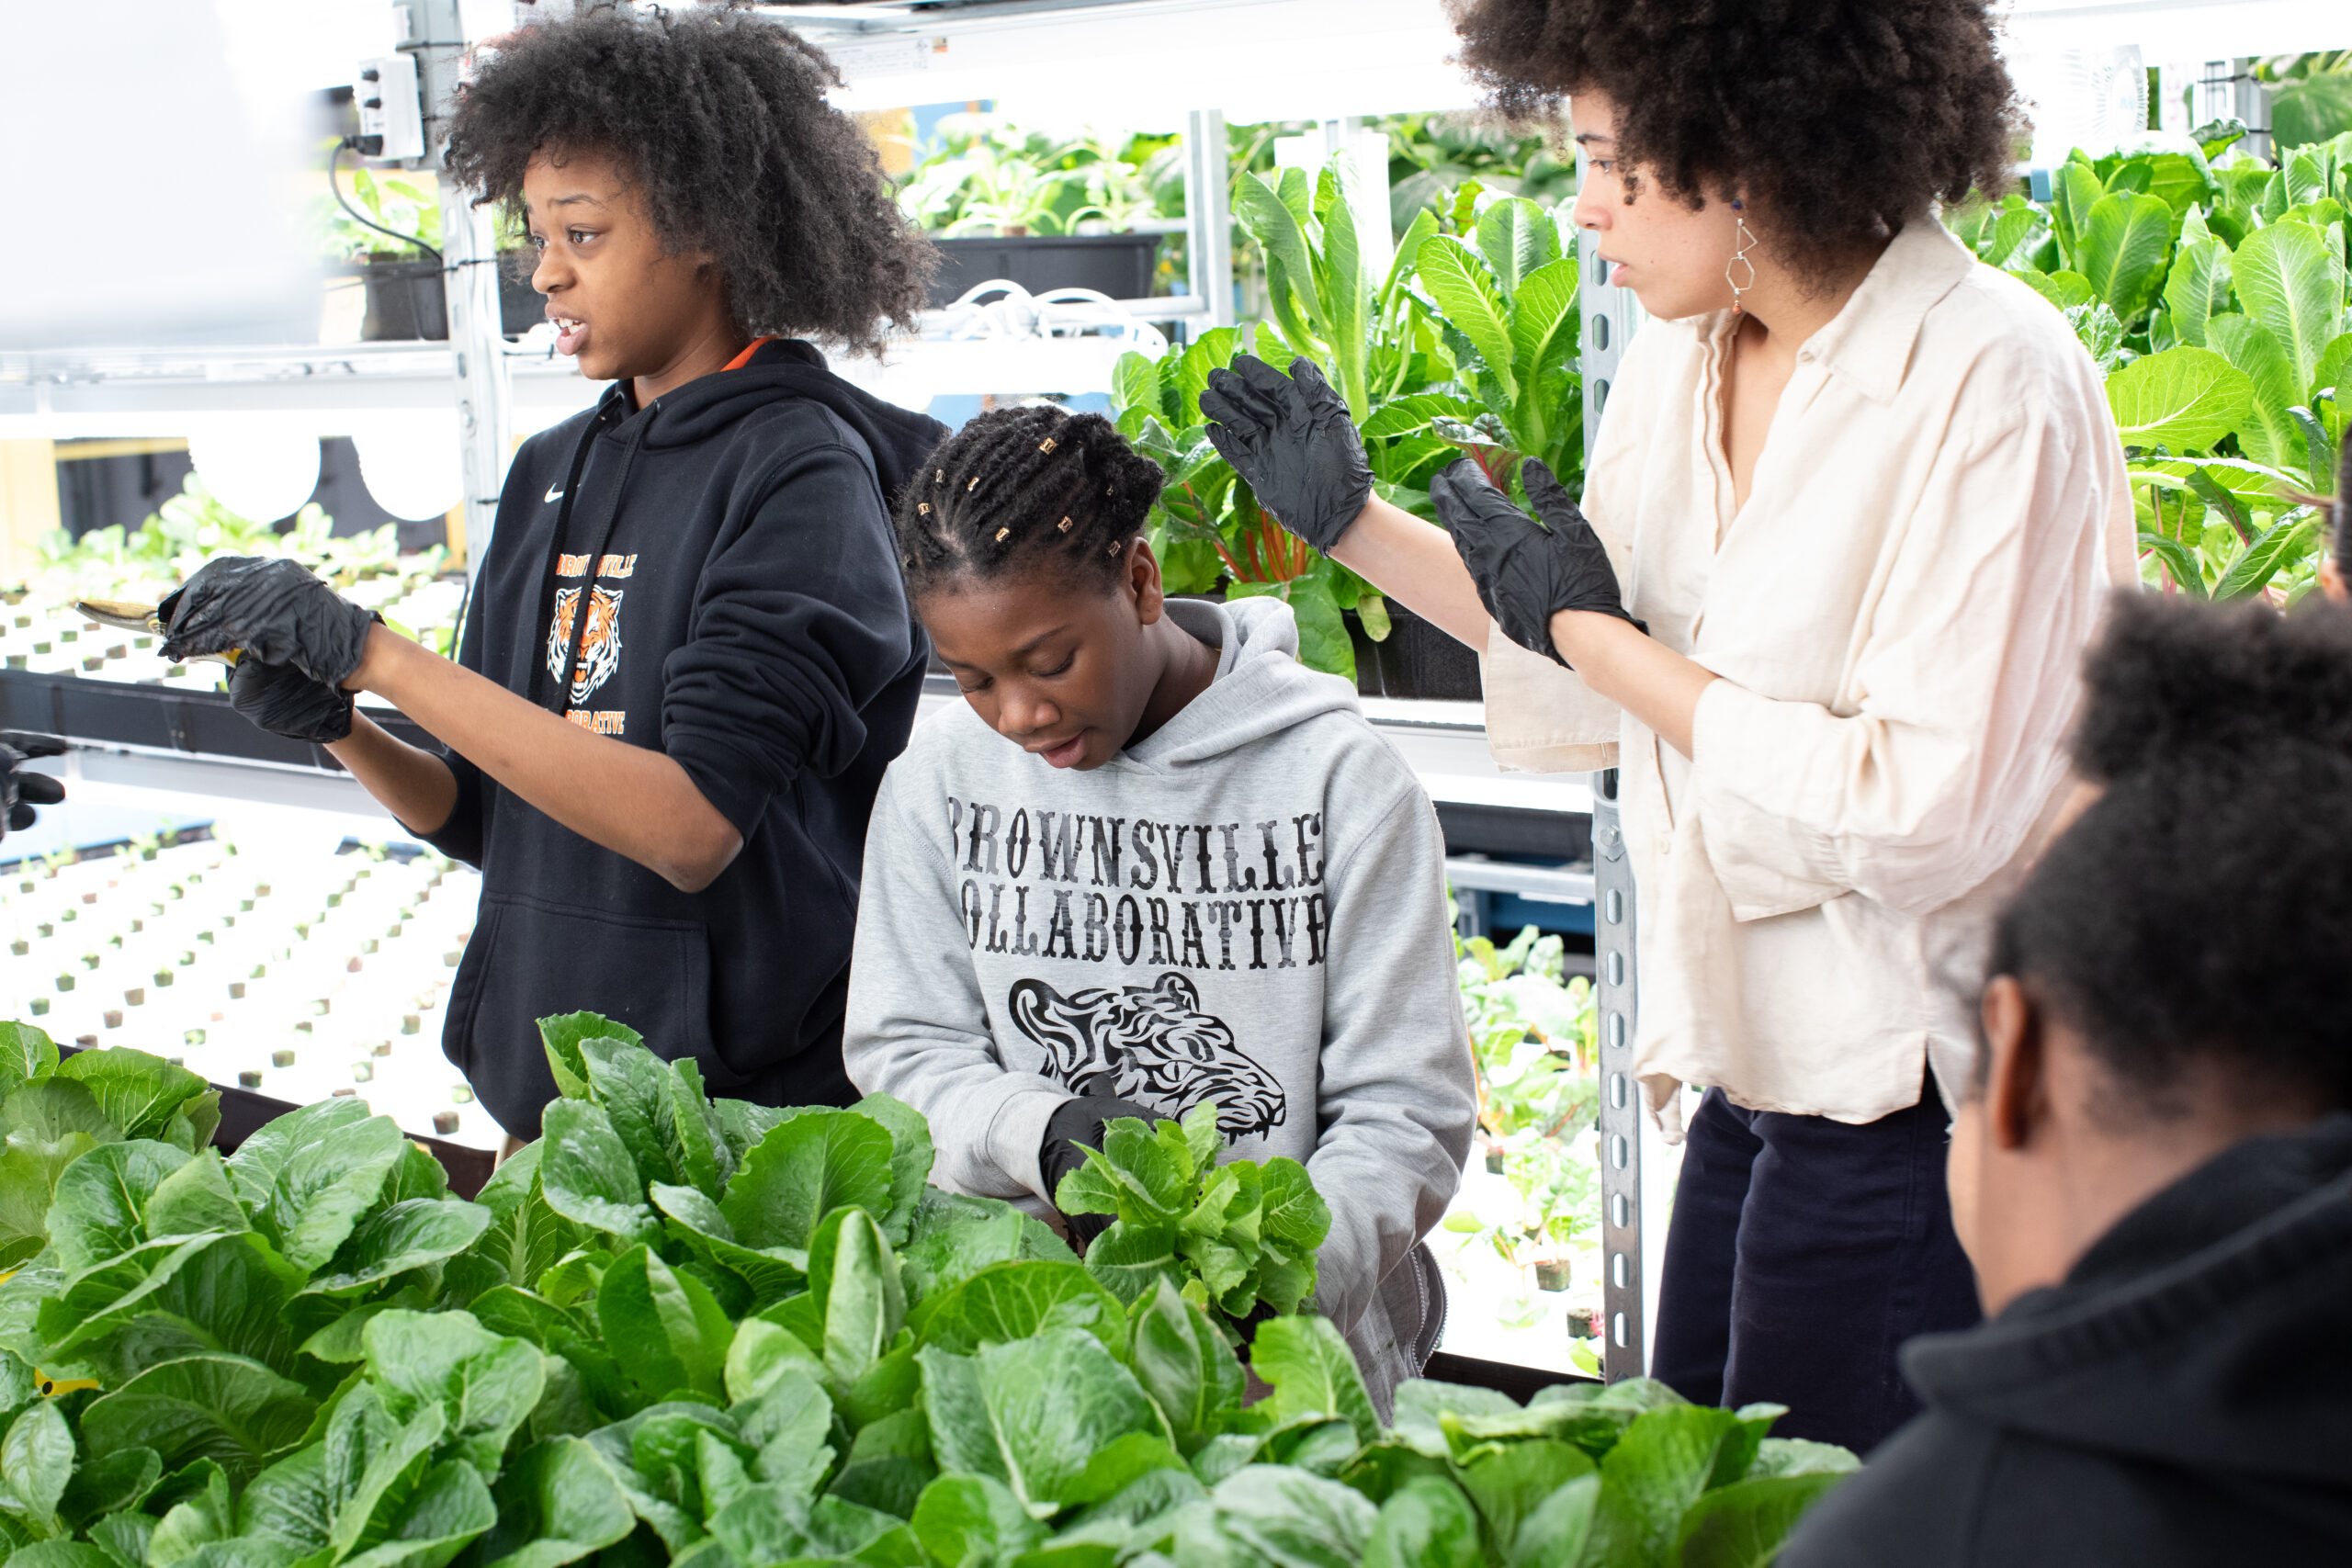 Students at Brownsville Collaborative Middle School work on Teens For Food Justice's indoor hydroponic farm at the school.